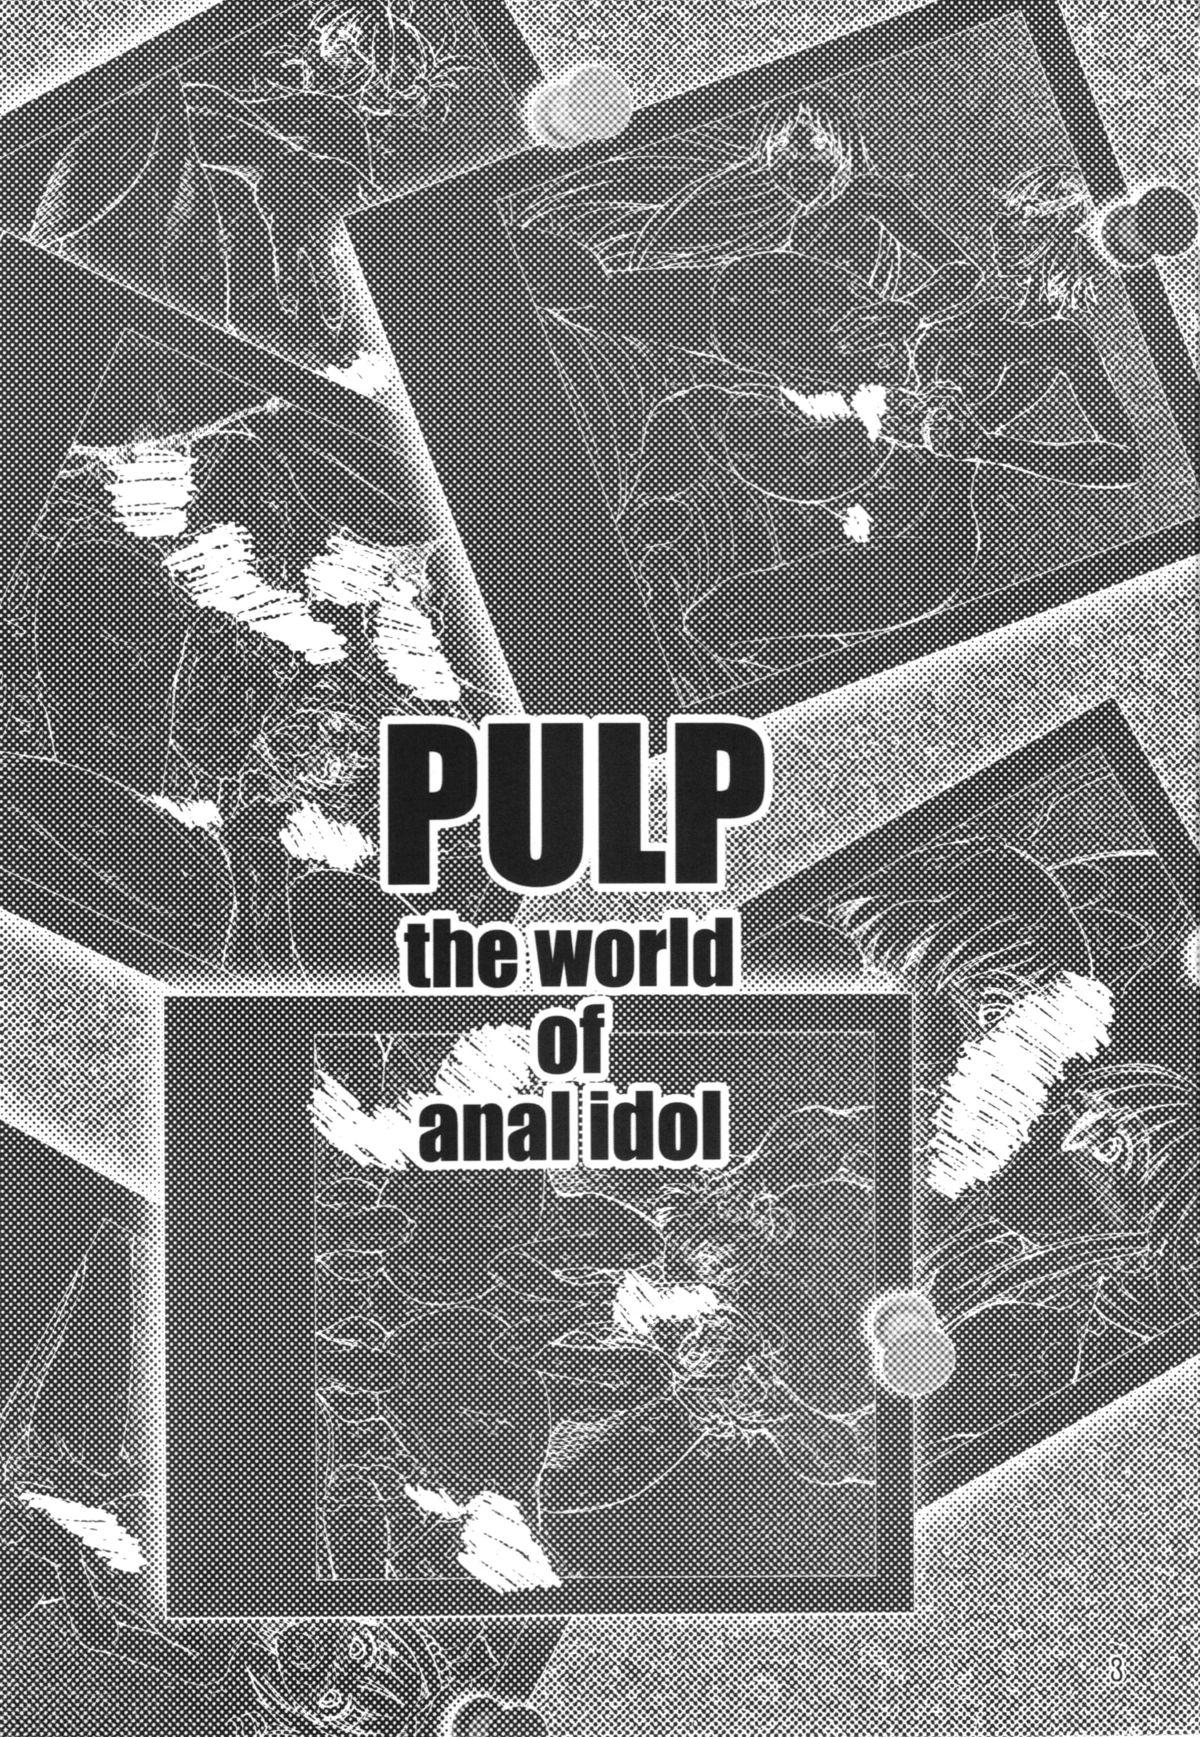 PULP the world of anal idol 2